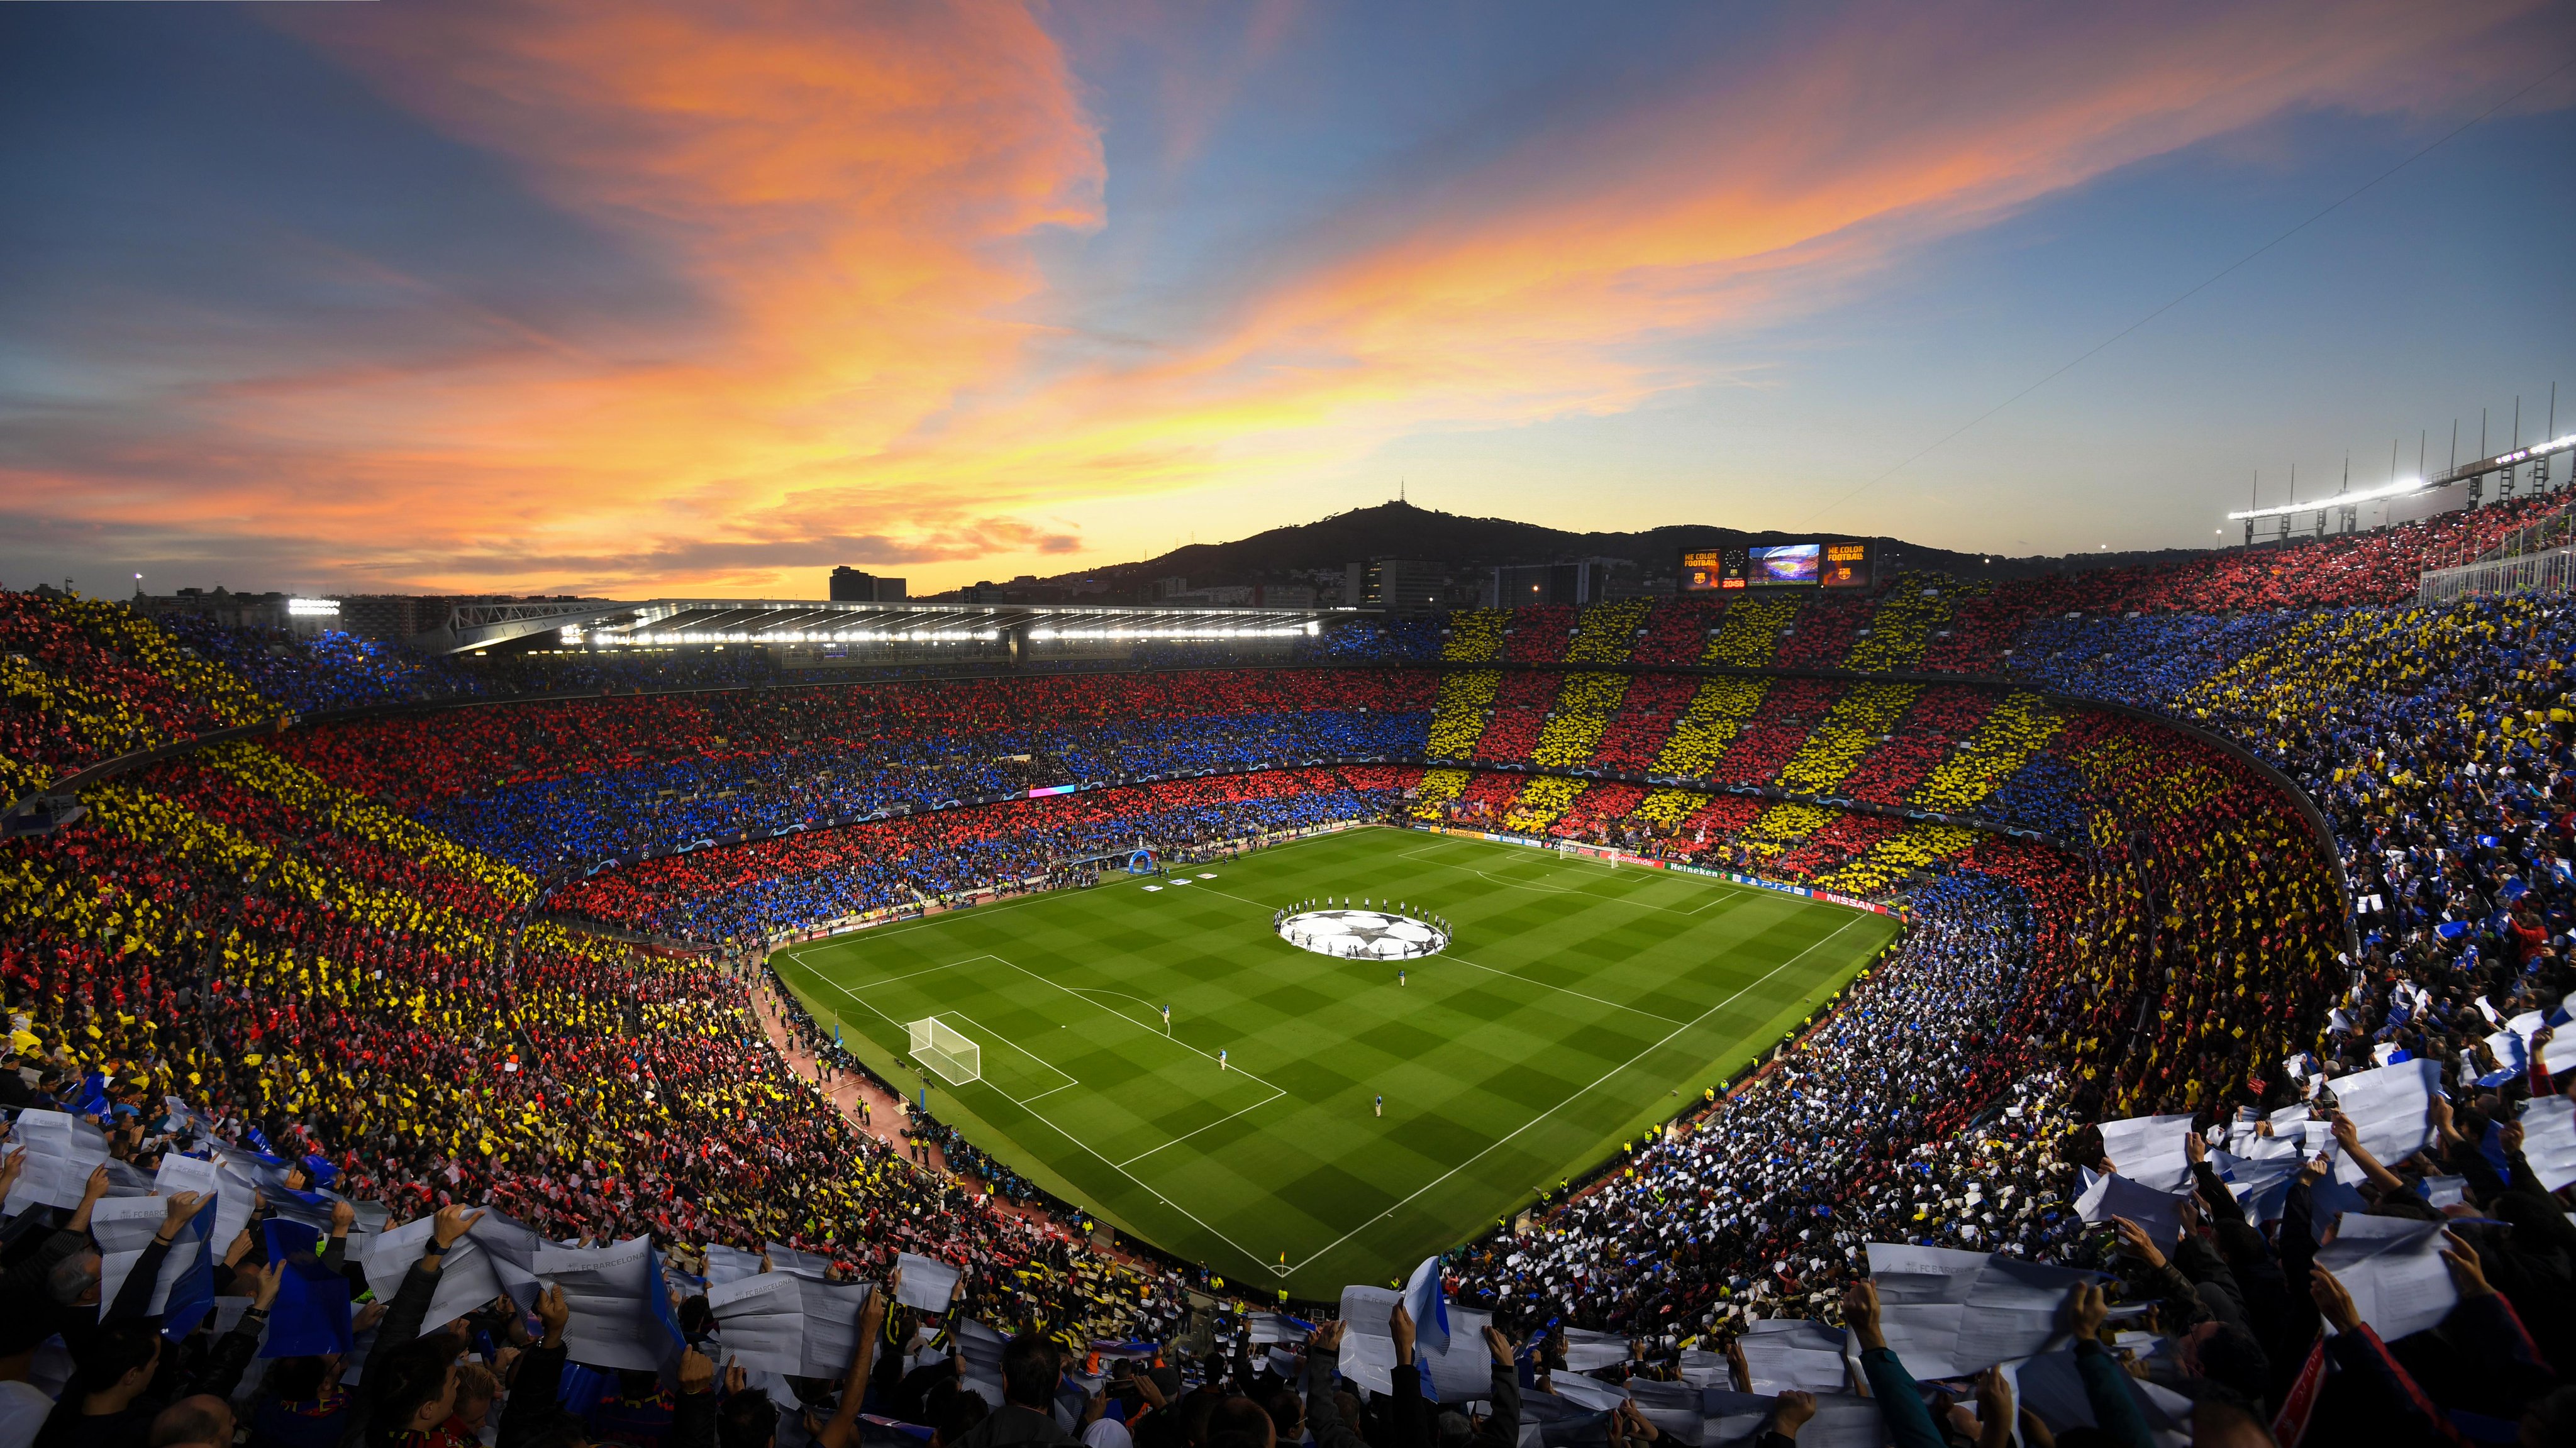 Barcelona New Sponsor deal: Barcelona announce stadium and shirt sponsorship deal with Spotify with the stadium to be renamed as Spotify Camp Nou 